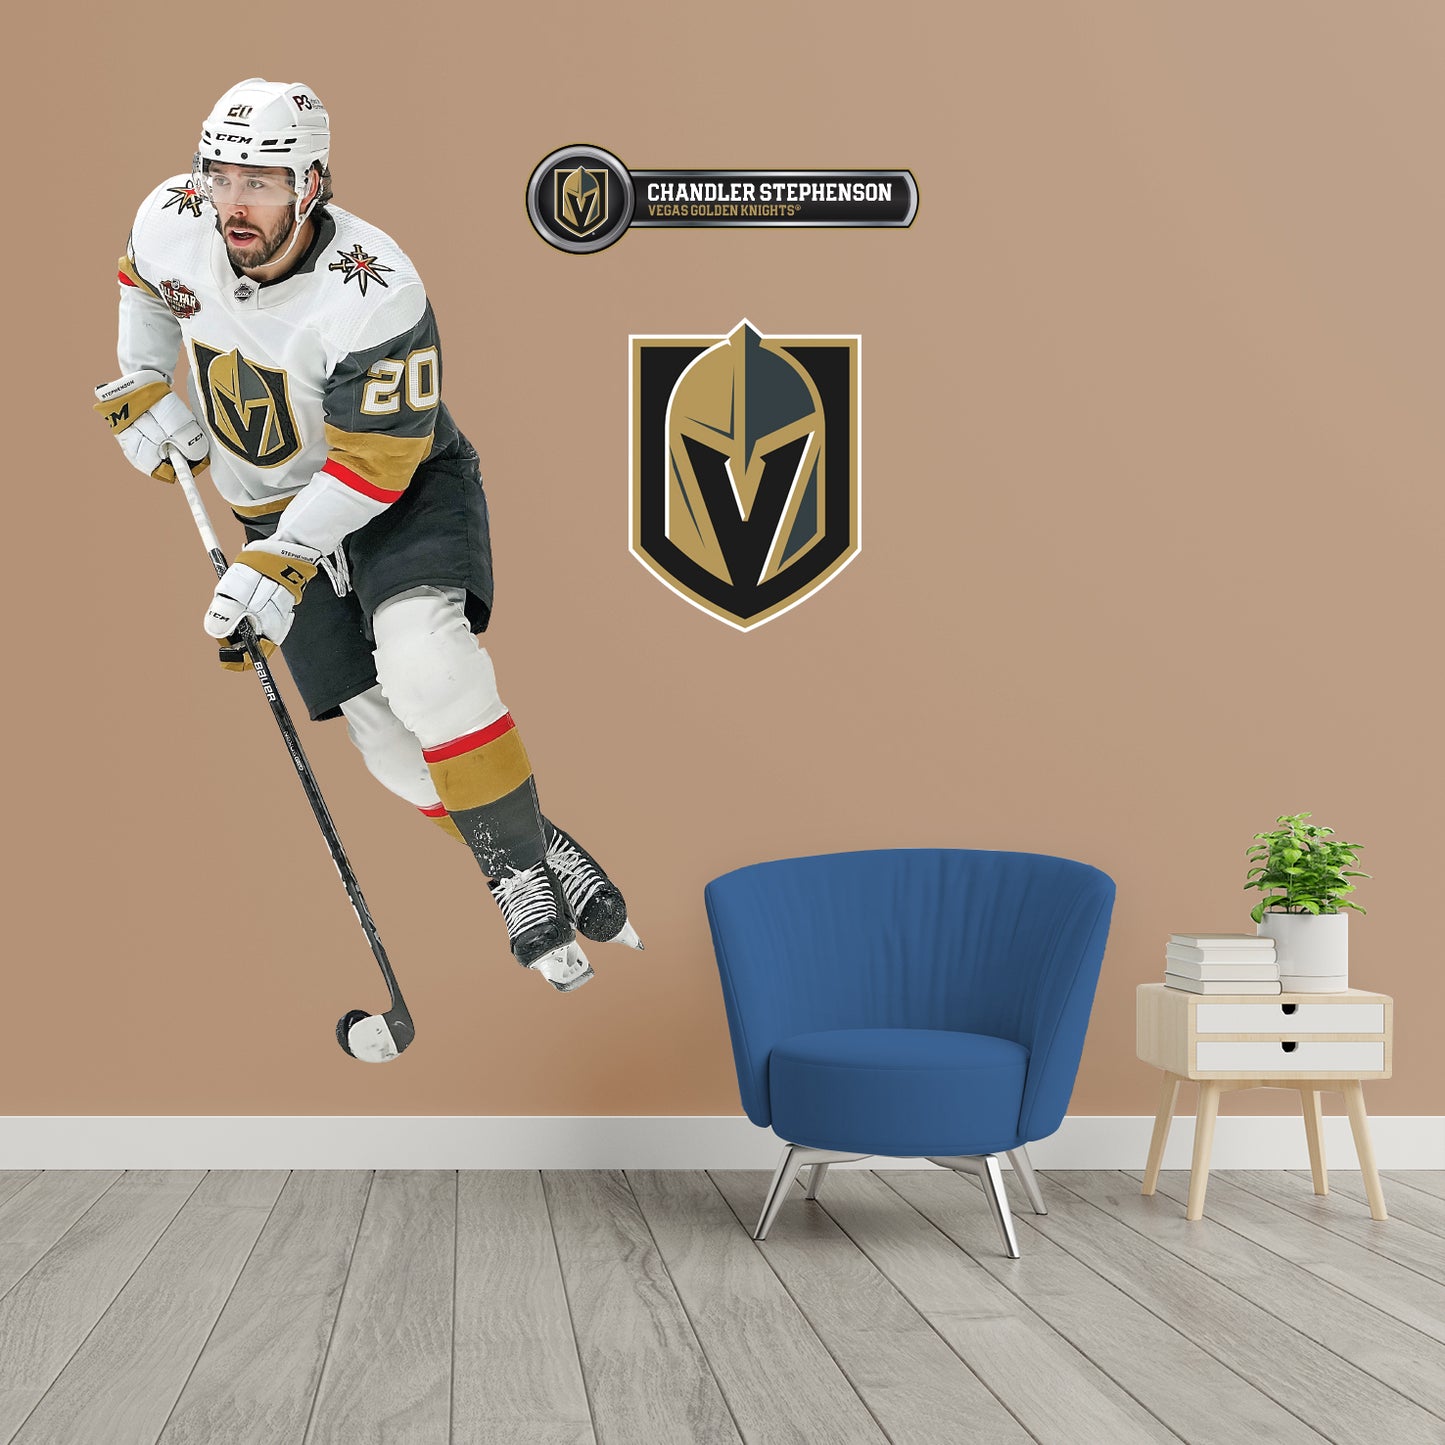 Vegas Golden Knights: Chandler Stephenson - Officially Licensed NHL Removable Adhesive Decal